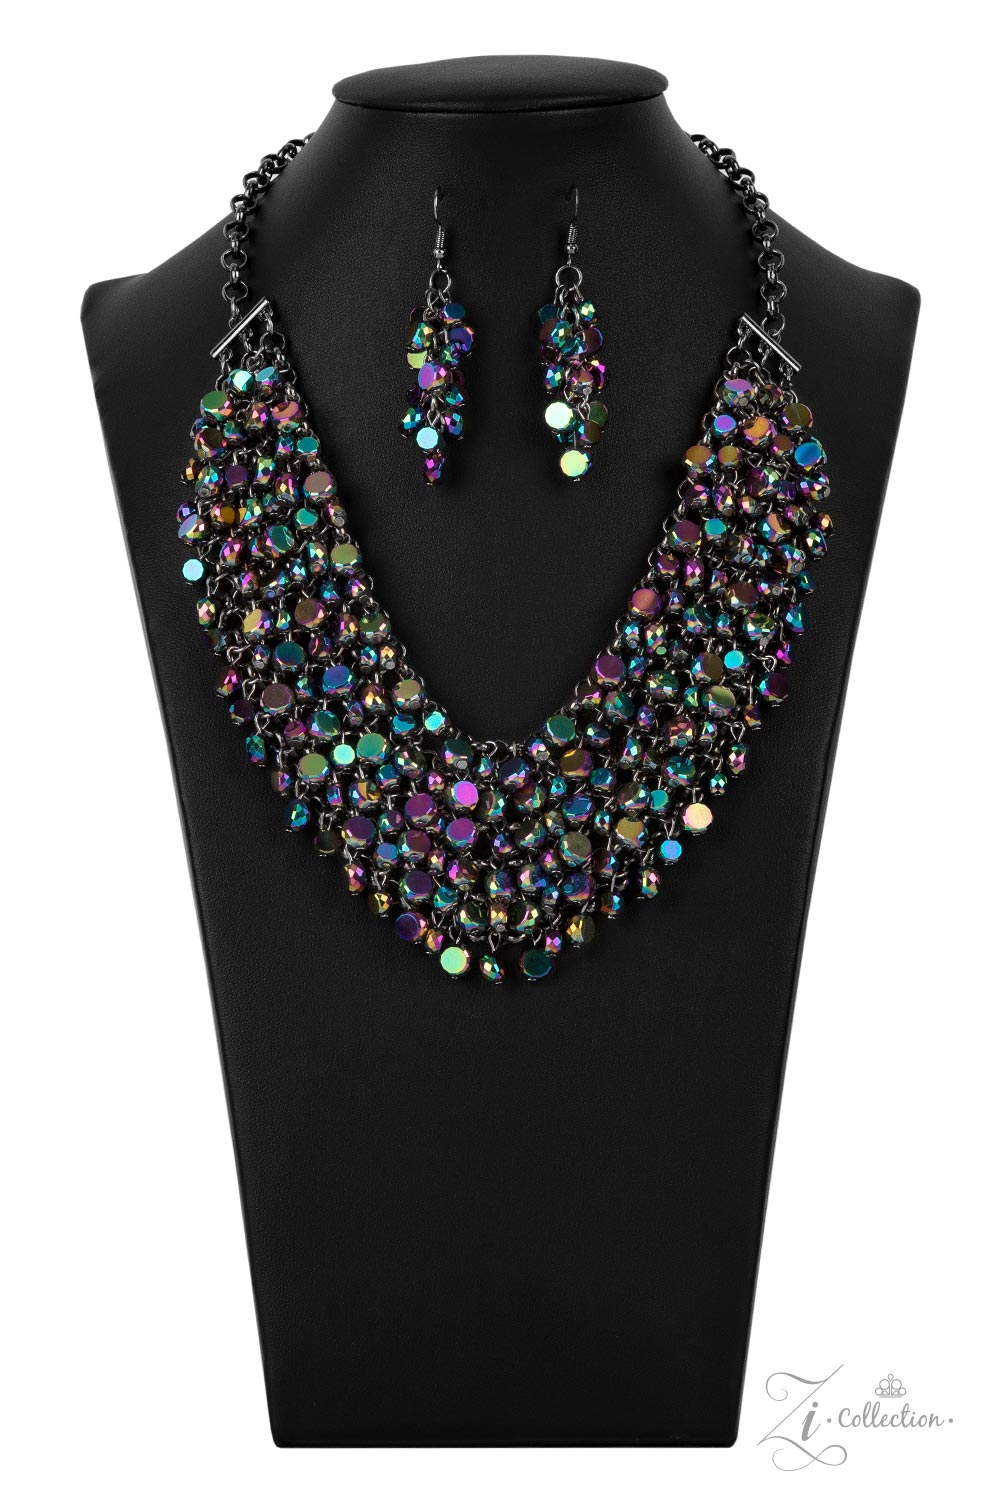 Vivacious 2021 Zi Collection Necklace - Paparazzi Accessories  Fiercely faceted oil spill beads flawlessly cascade from row after row of boldly interlocking gunmetal links that connect into an intense metallic netted backdrop. Attached to matching chunky gunmetal chains, the effervescently edgy display noisily swishes back and forth, creating an out-of-this-world fringe below the collar. Features an adjustable clasp closure.  Sold as one individual necklace. Includes one pair of matching earrings.